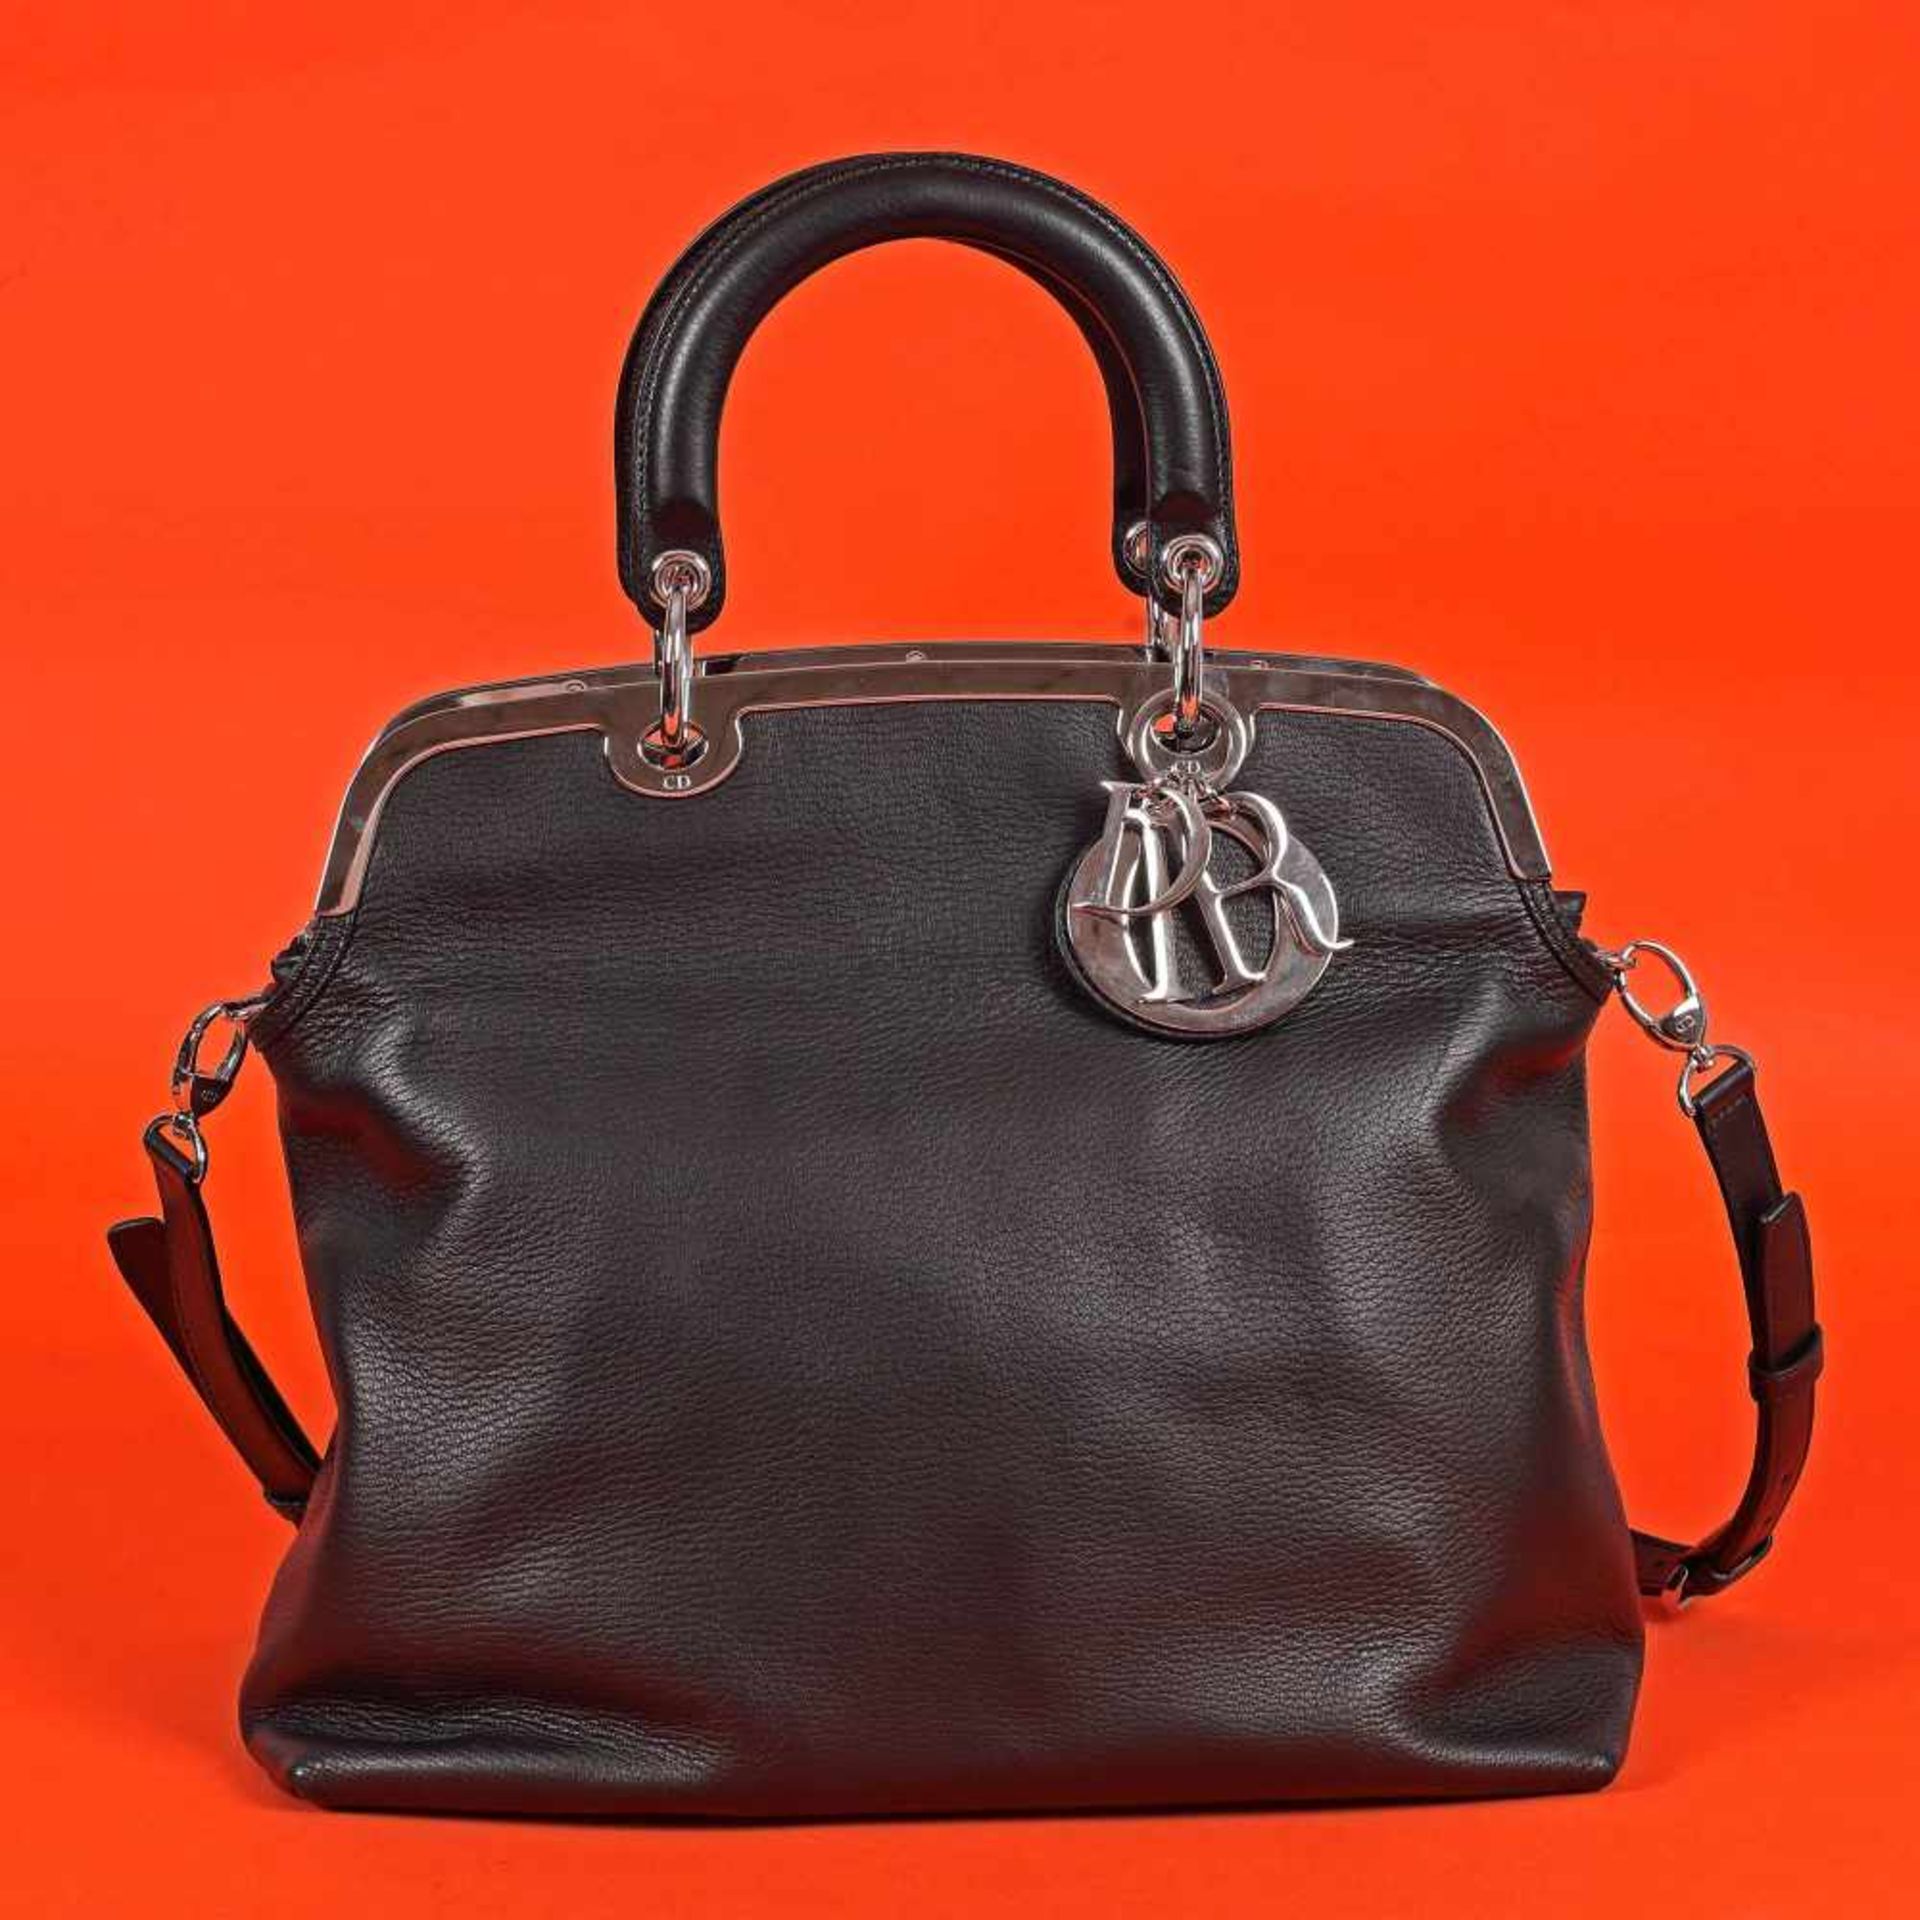 "Granville" - Dior bag, leather, for women - Image 2 of 8